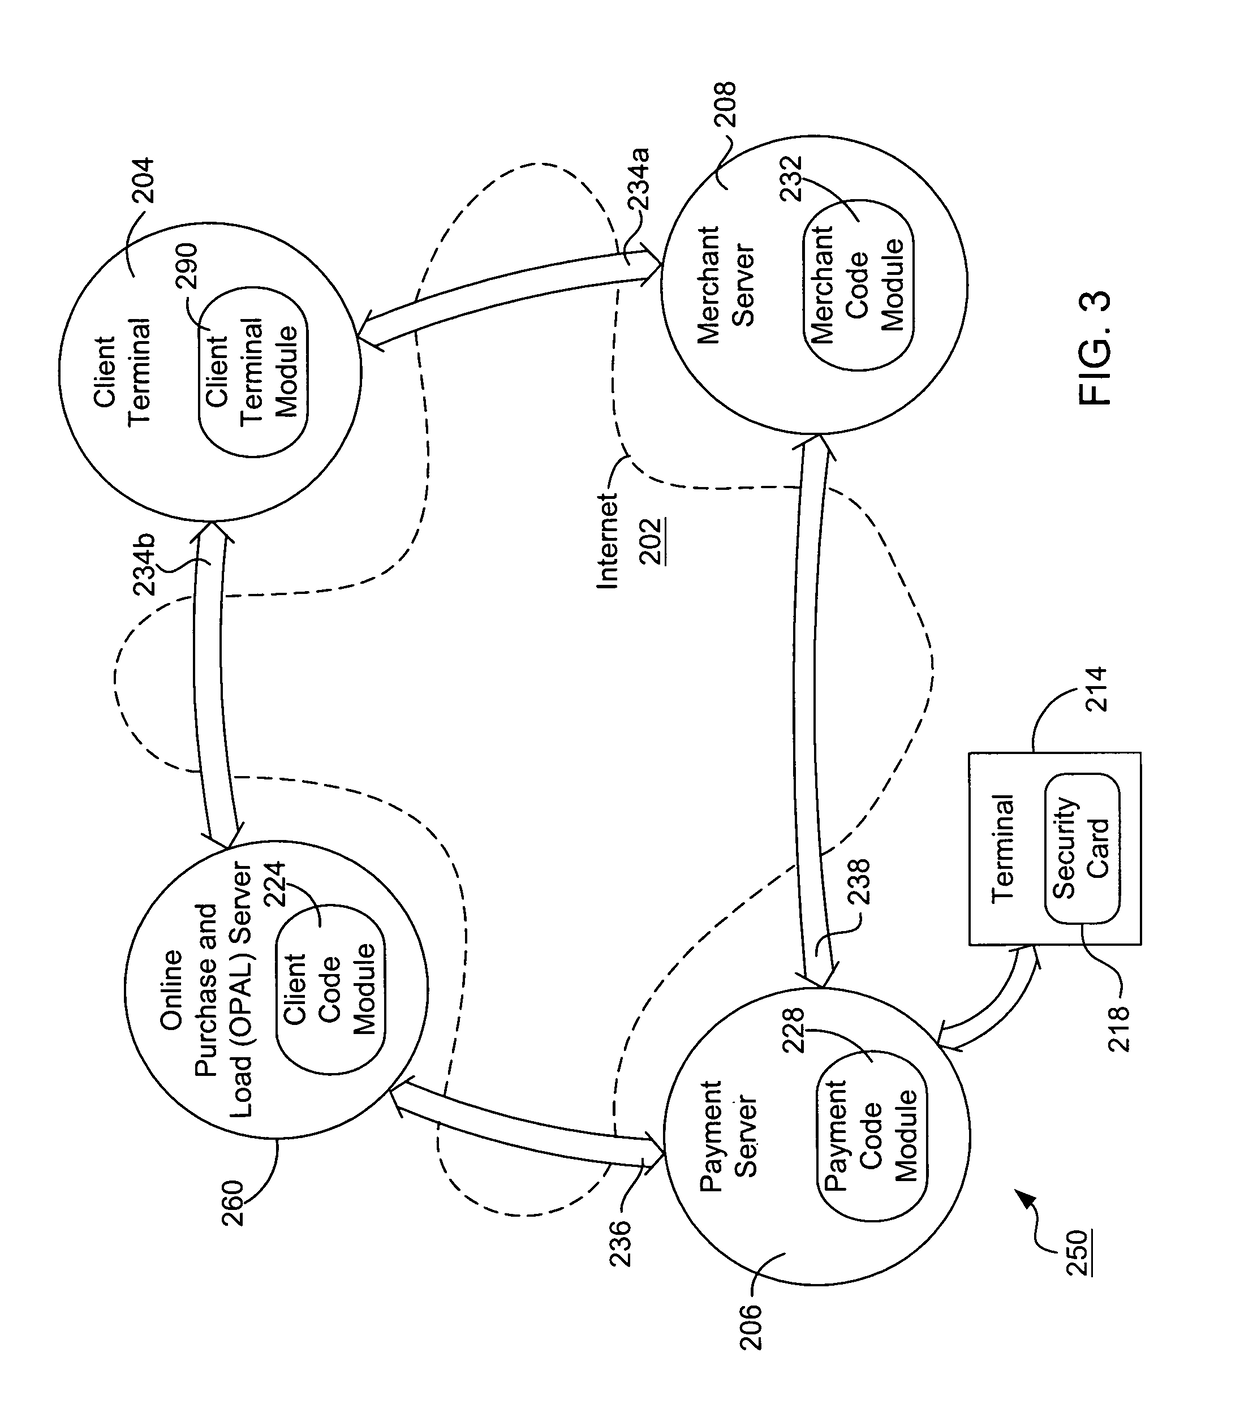 Internet payment, authentication and loading system using virtual smart card